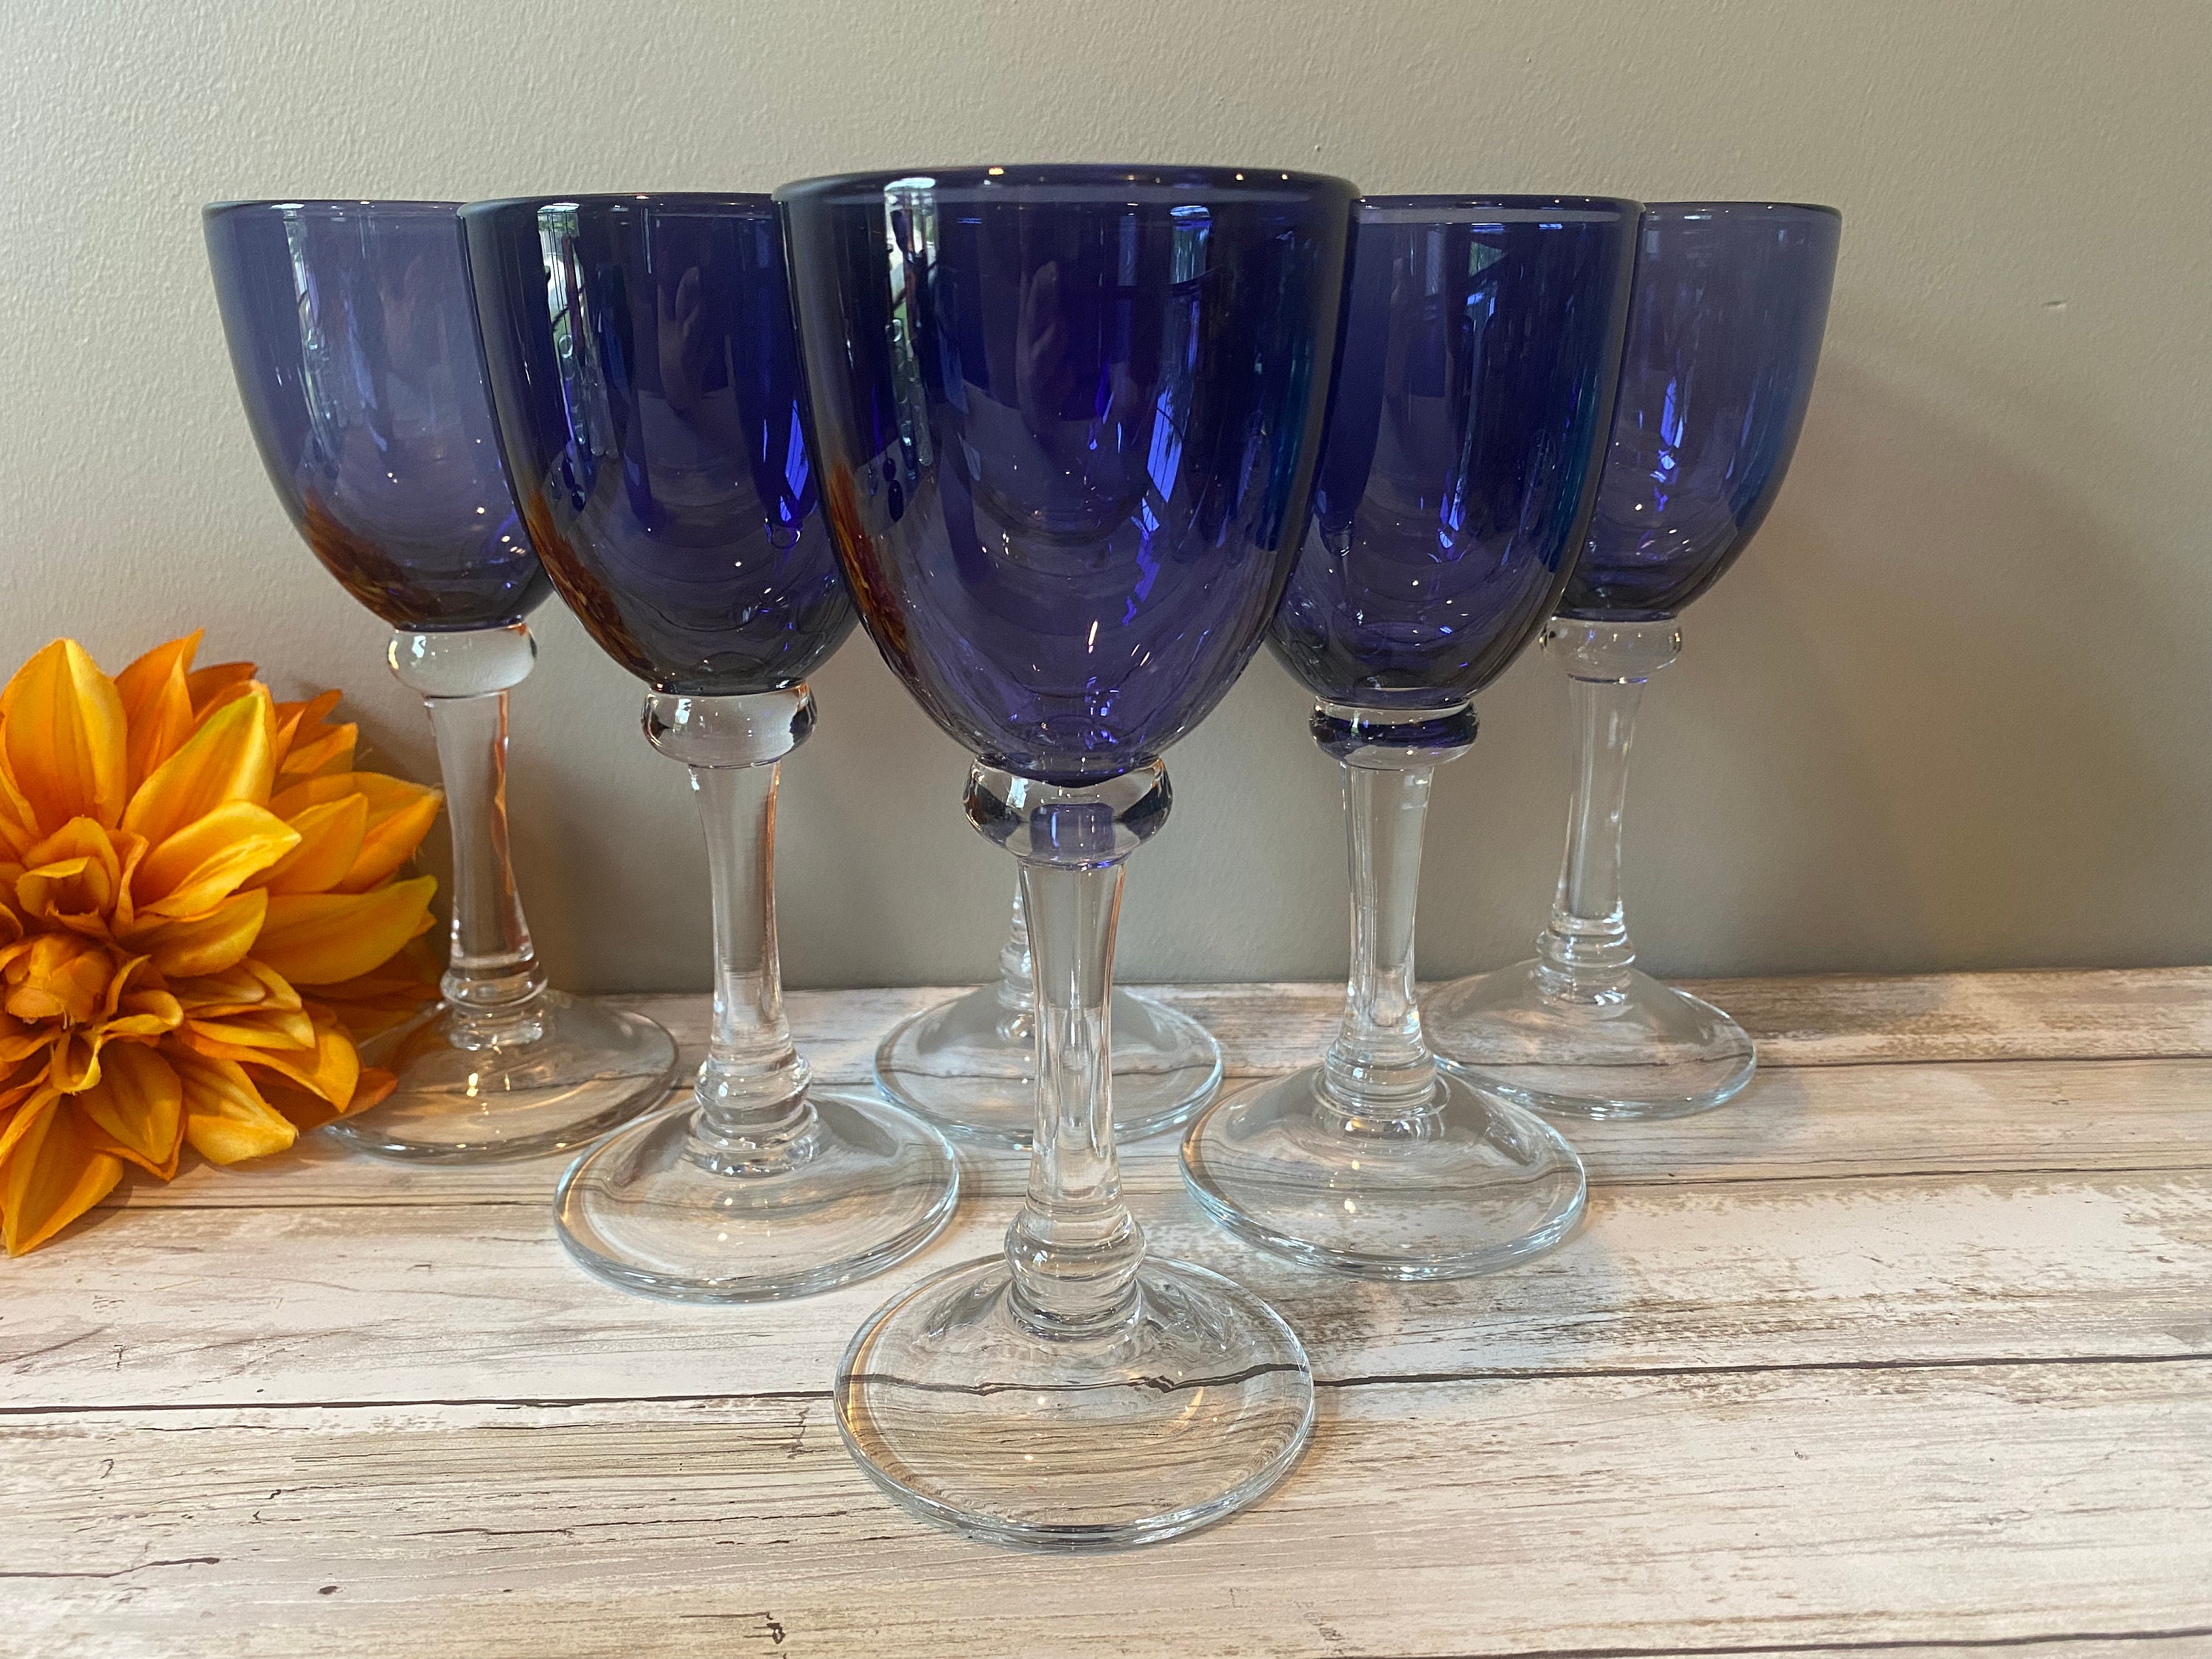 4 Crate & Barrel Nora” Goblet Wine/ Water Glass Stems 9.5 2005-12  discontinued